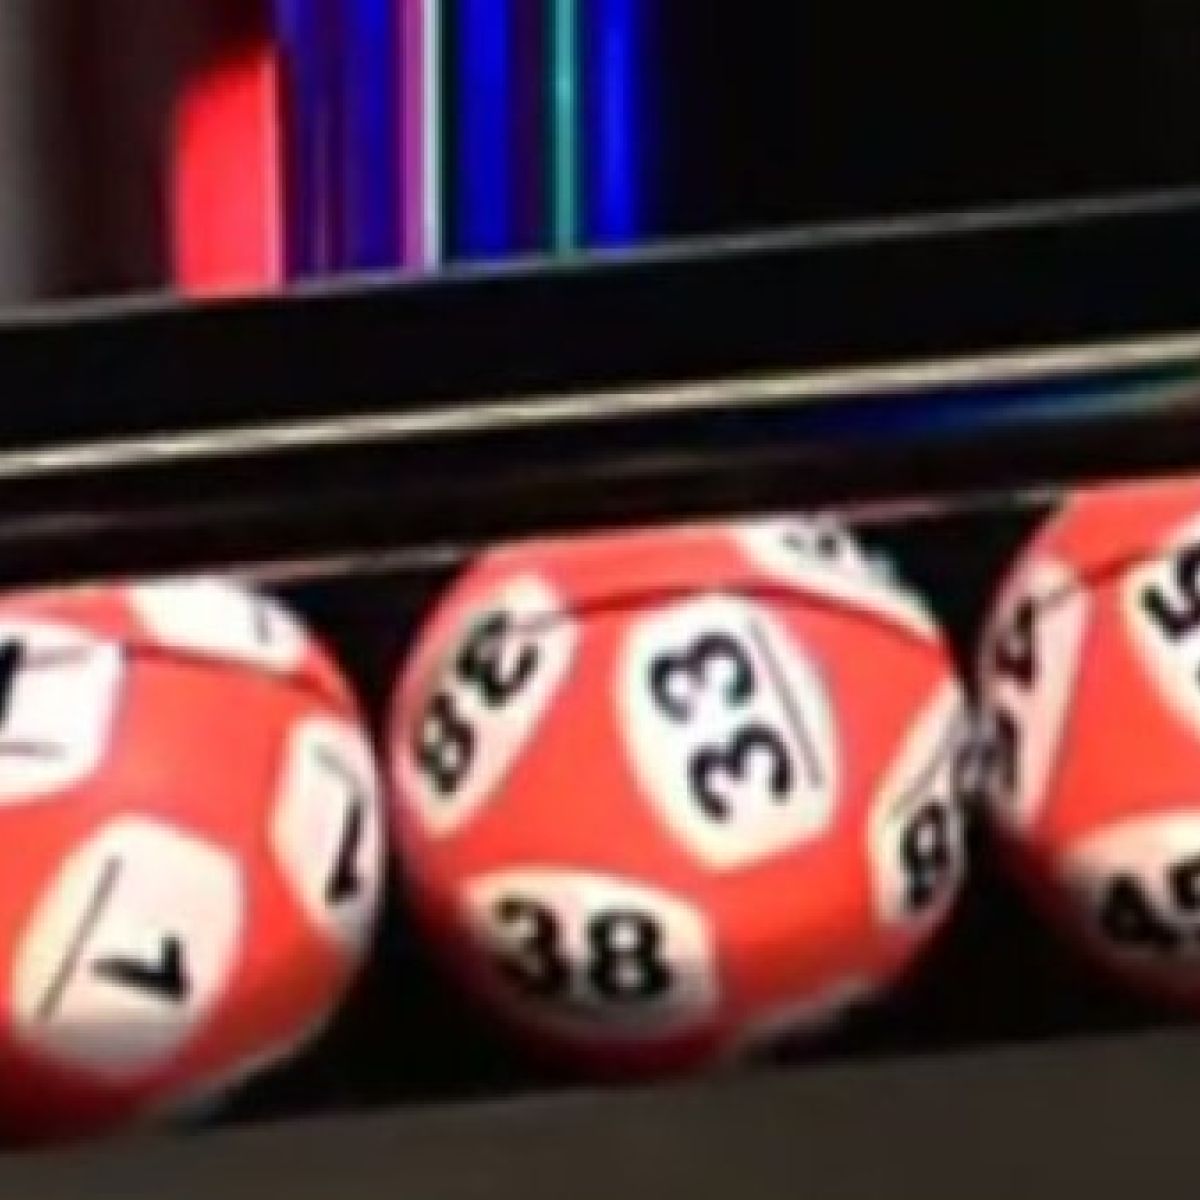 lotto two numbers and bonus ball